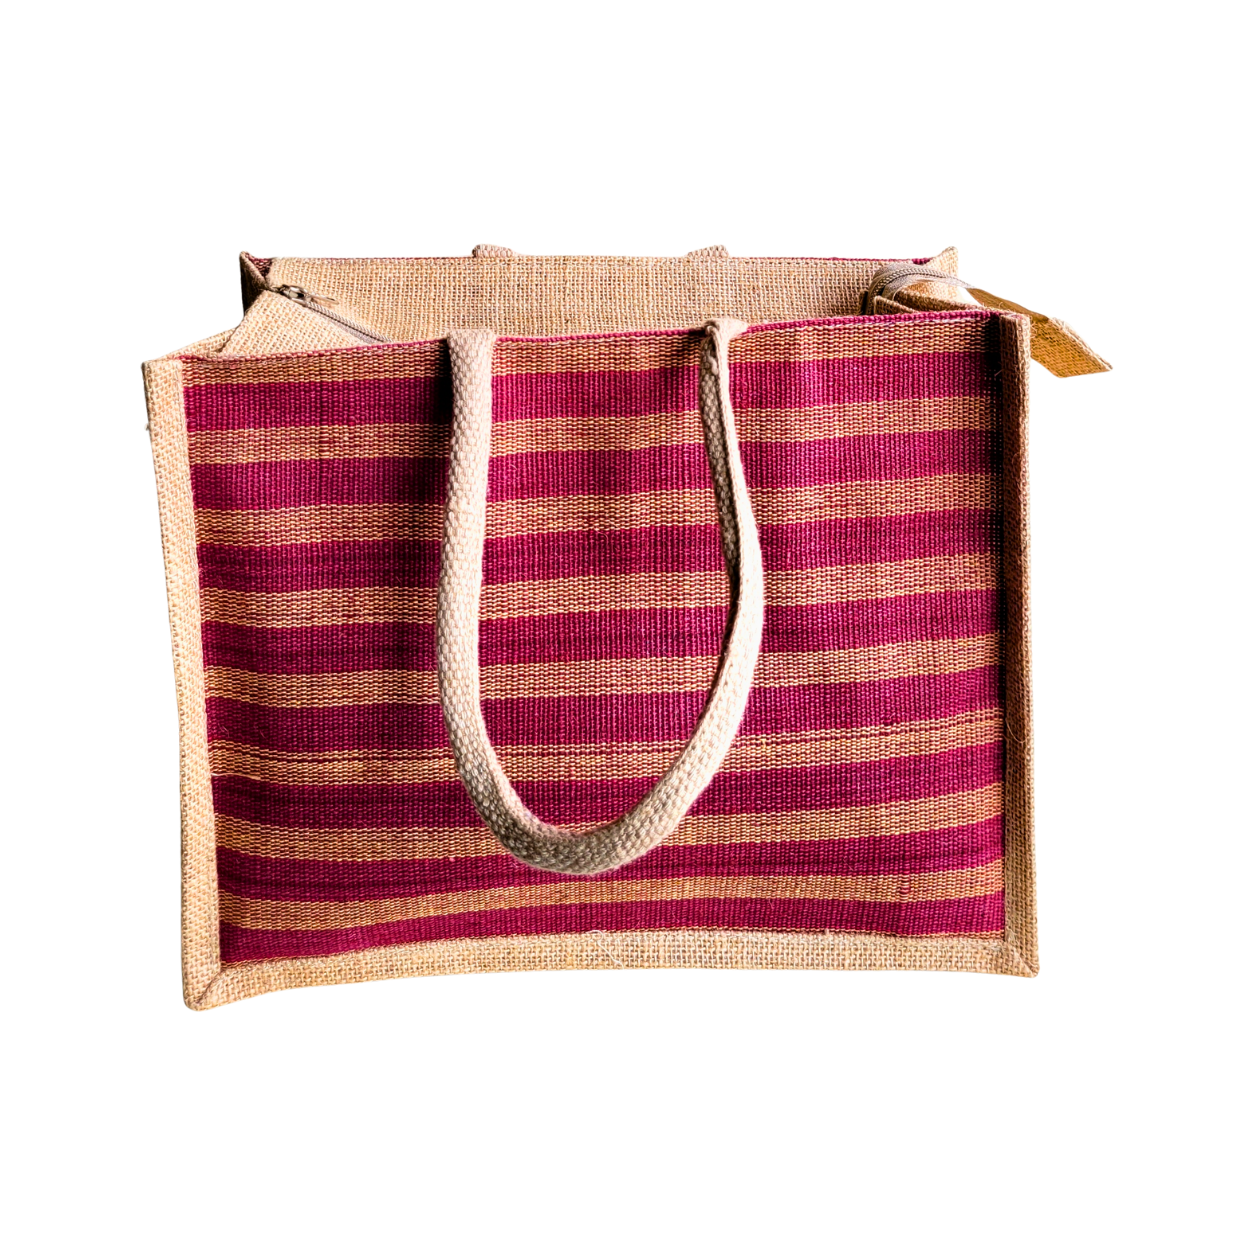 Fashionable Jute Lunch Bag Handloom - Red Large